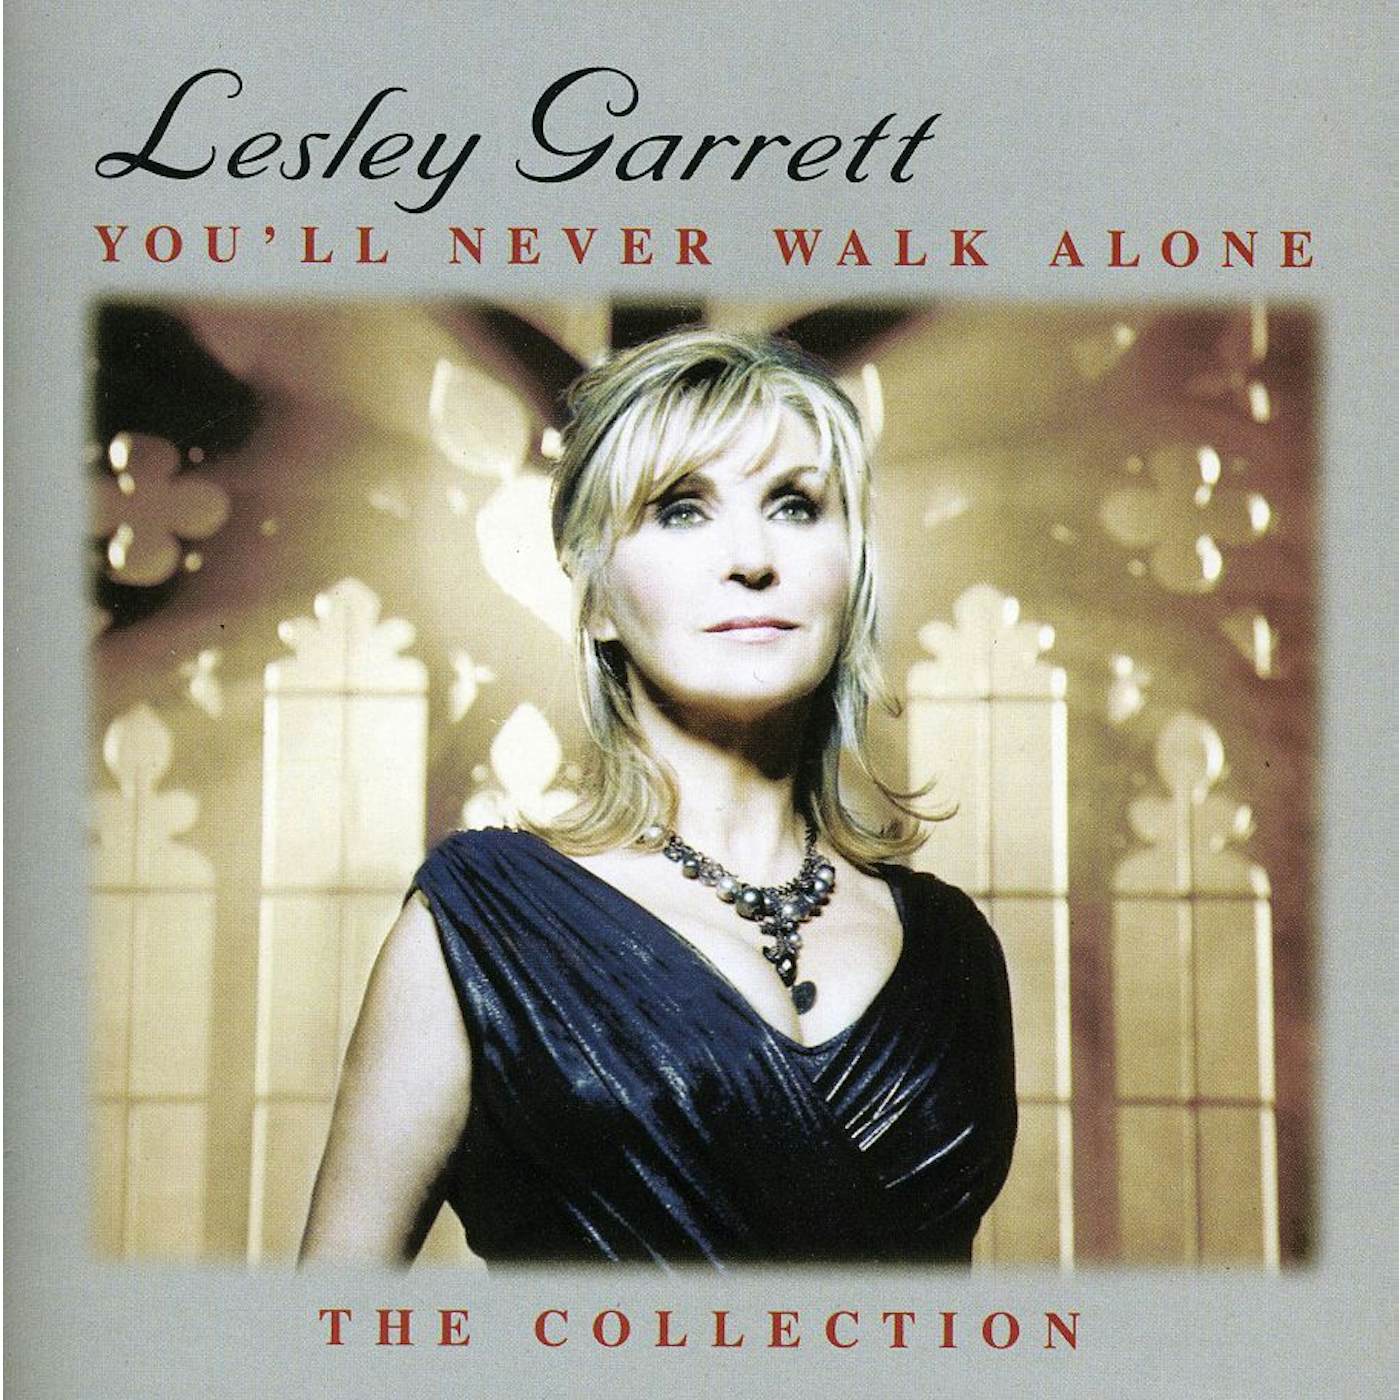 Lesley Garrett YOULL NEVER WALK ALONE: COLLECTION CD